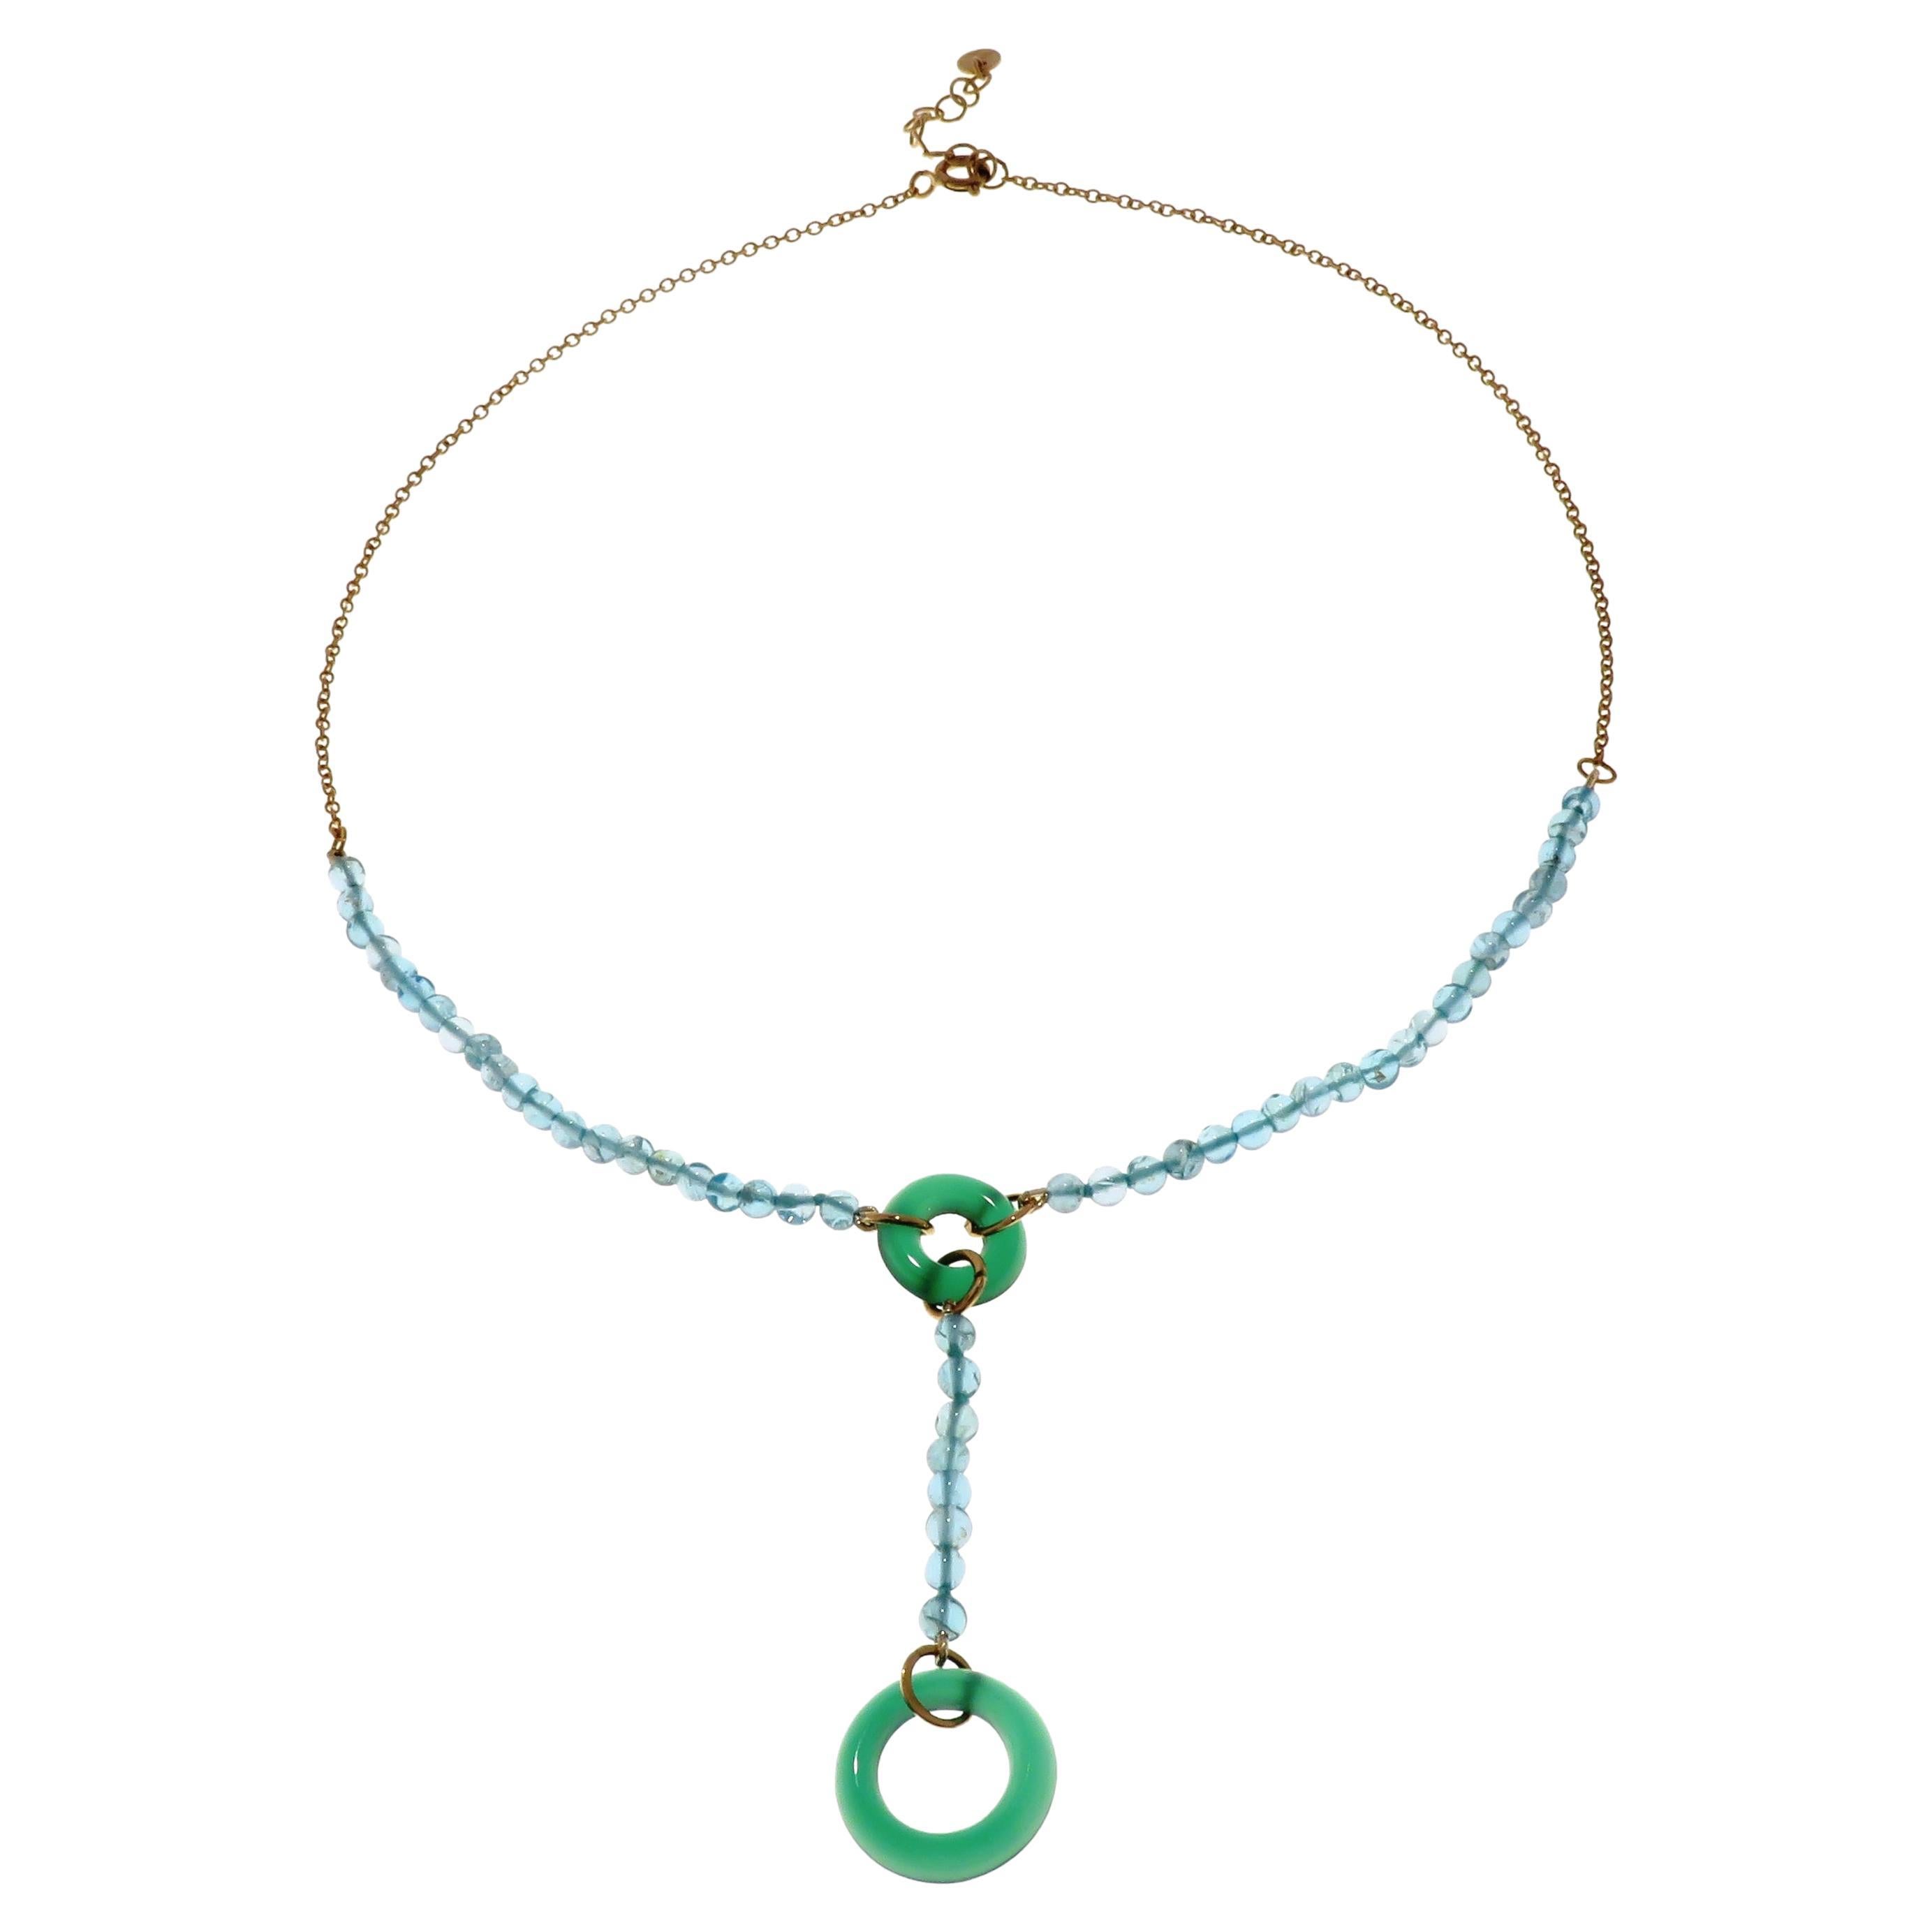 Apatite Green Agate 9 Karat Rose Gold Necklace Handcrafted in Italy